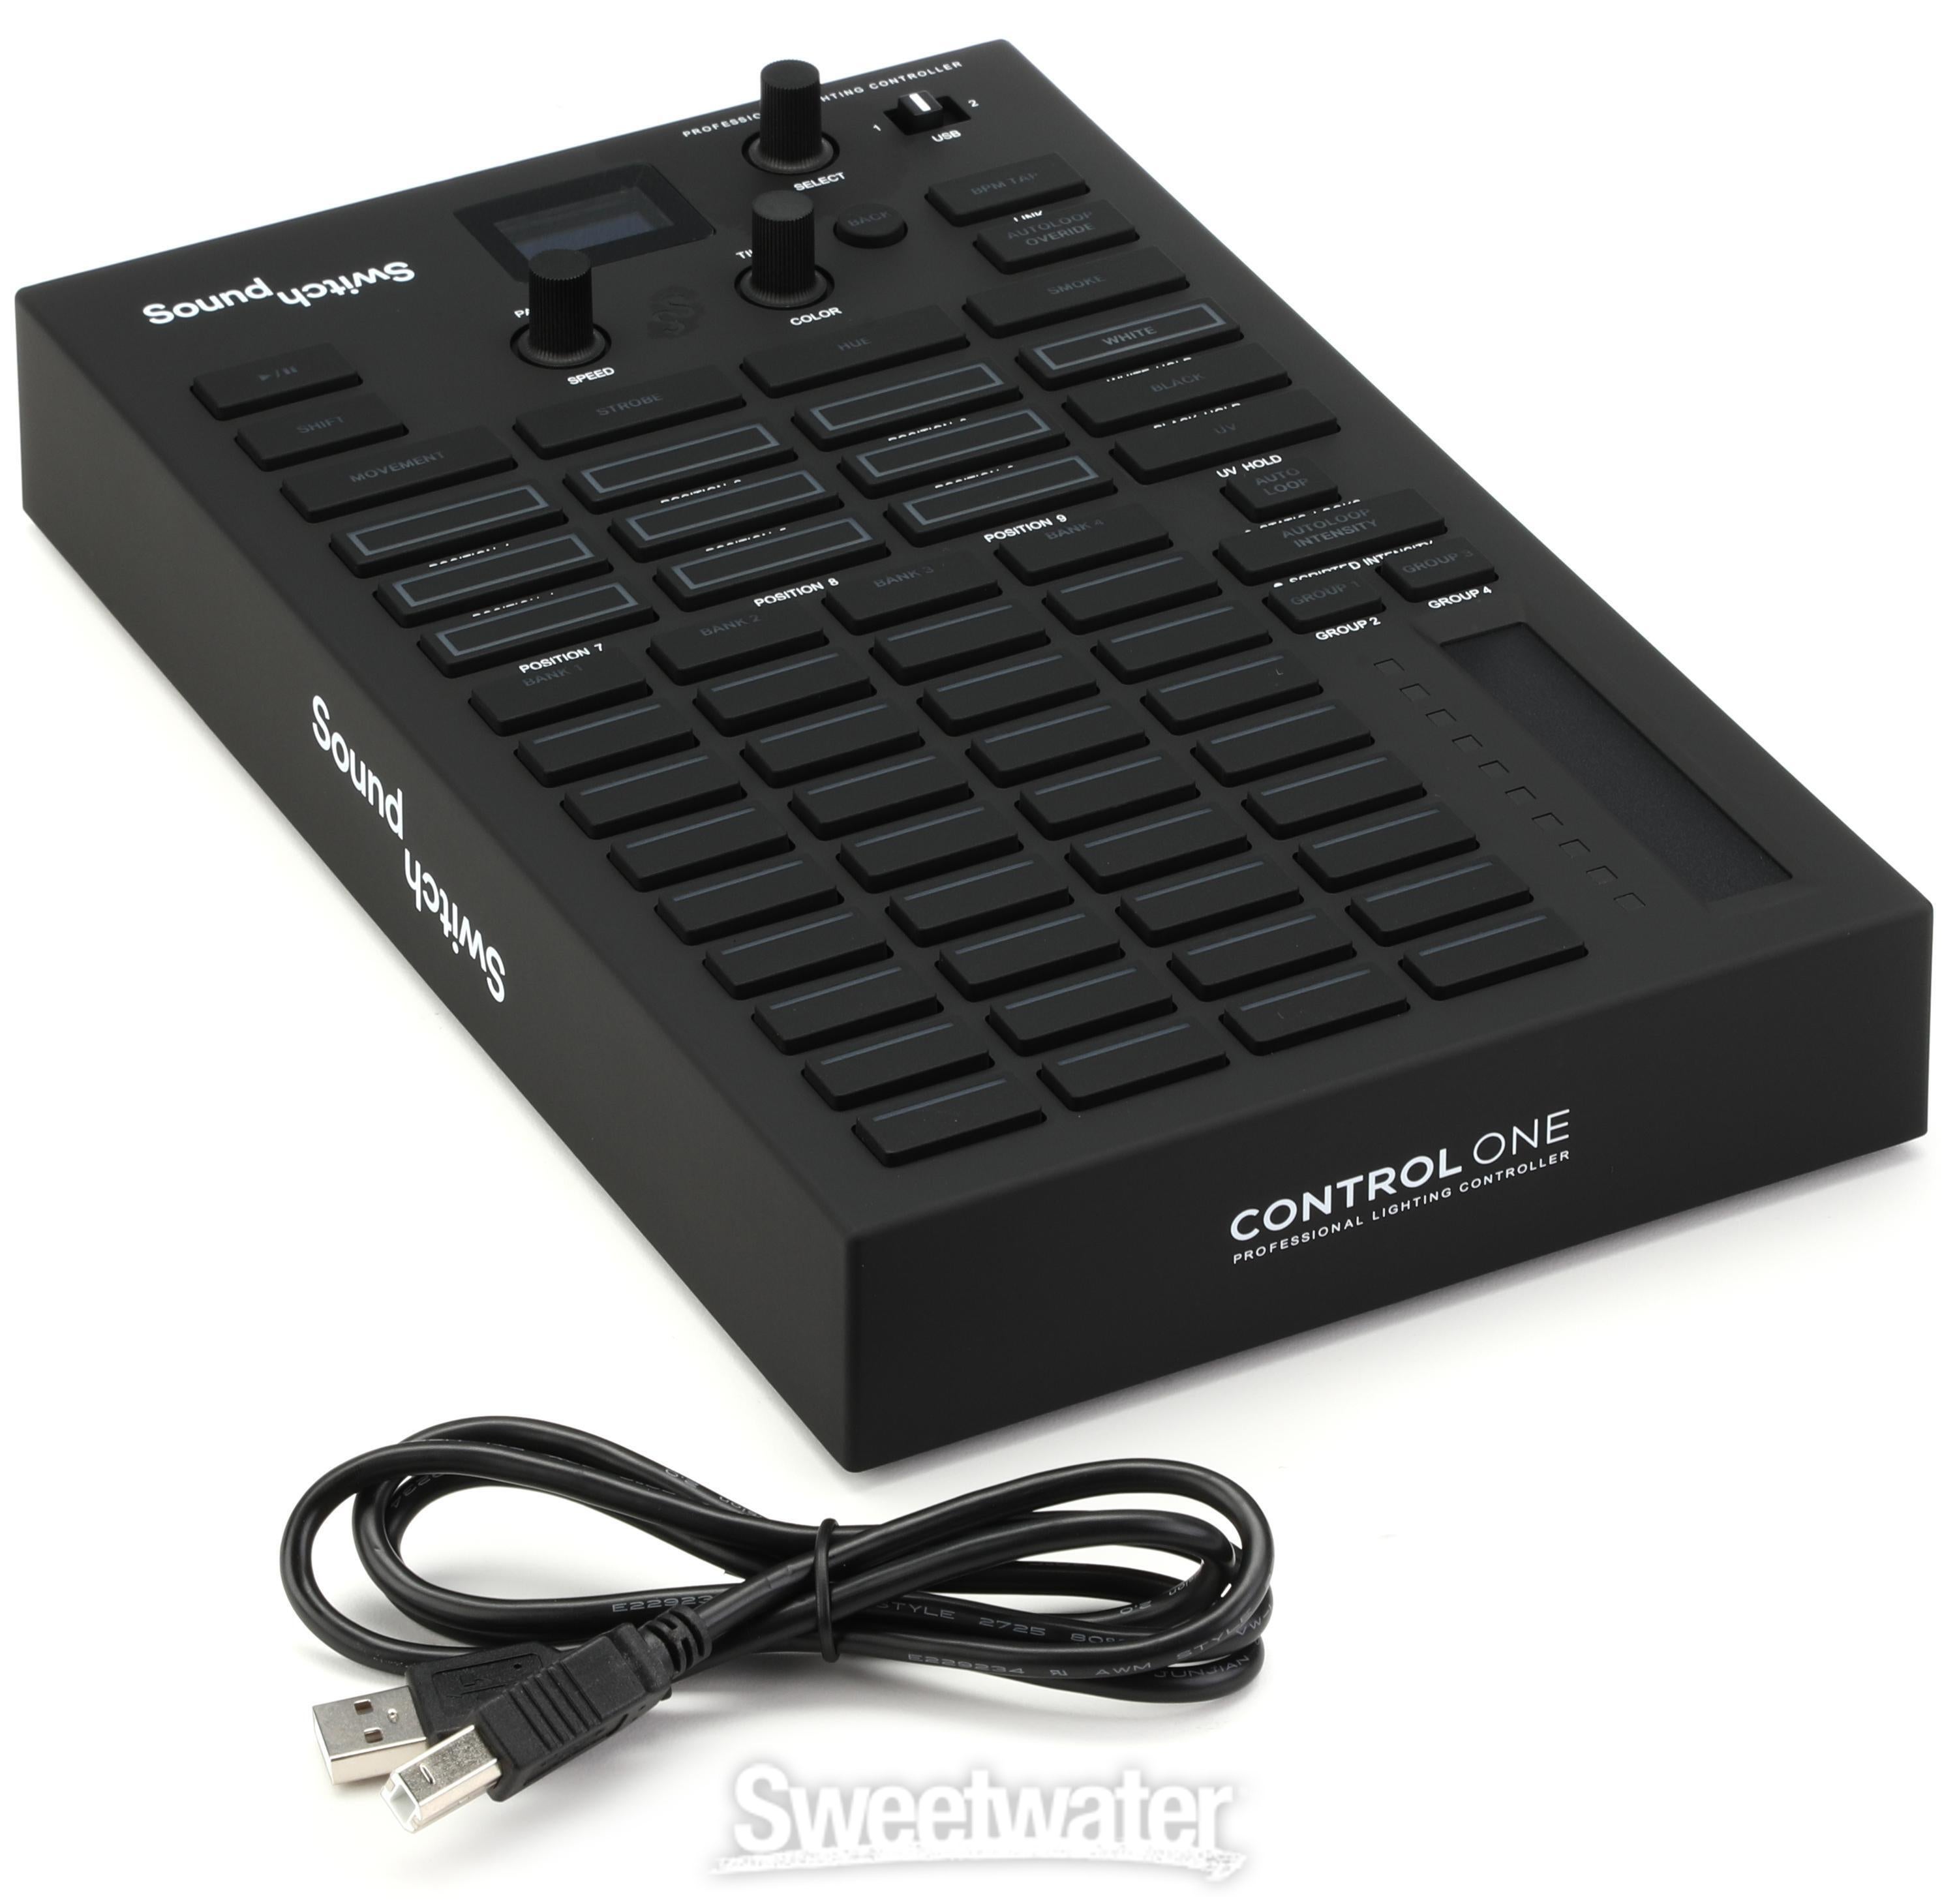 SoundSwitch Control One Lighting Controller / Interface | Sweetwater